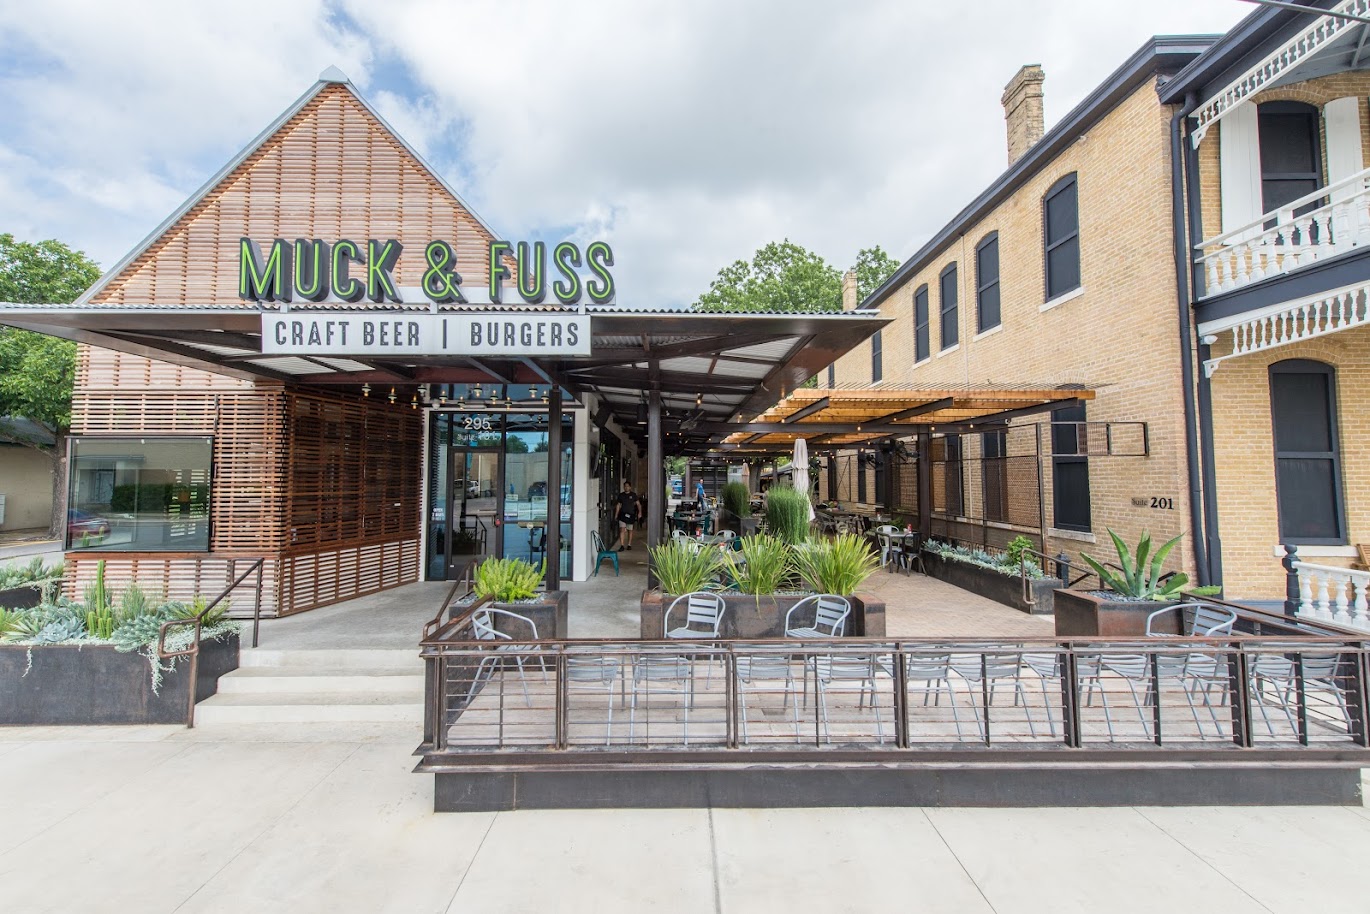 Muck & Fuss Craft Beer and Burgers